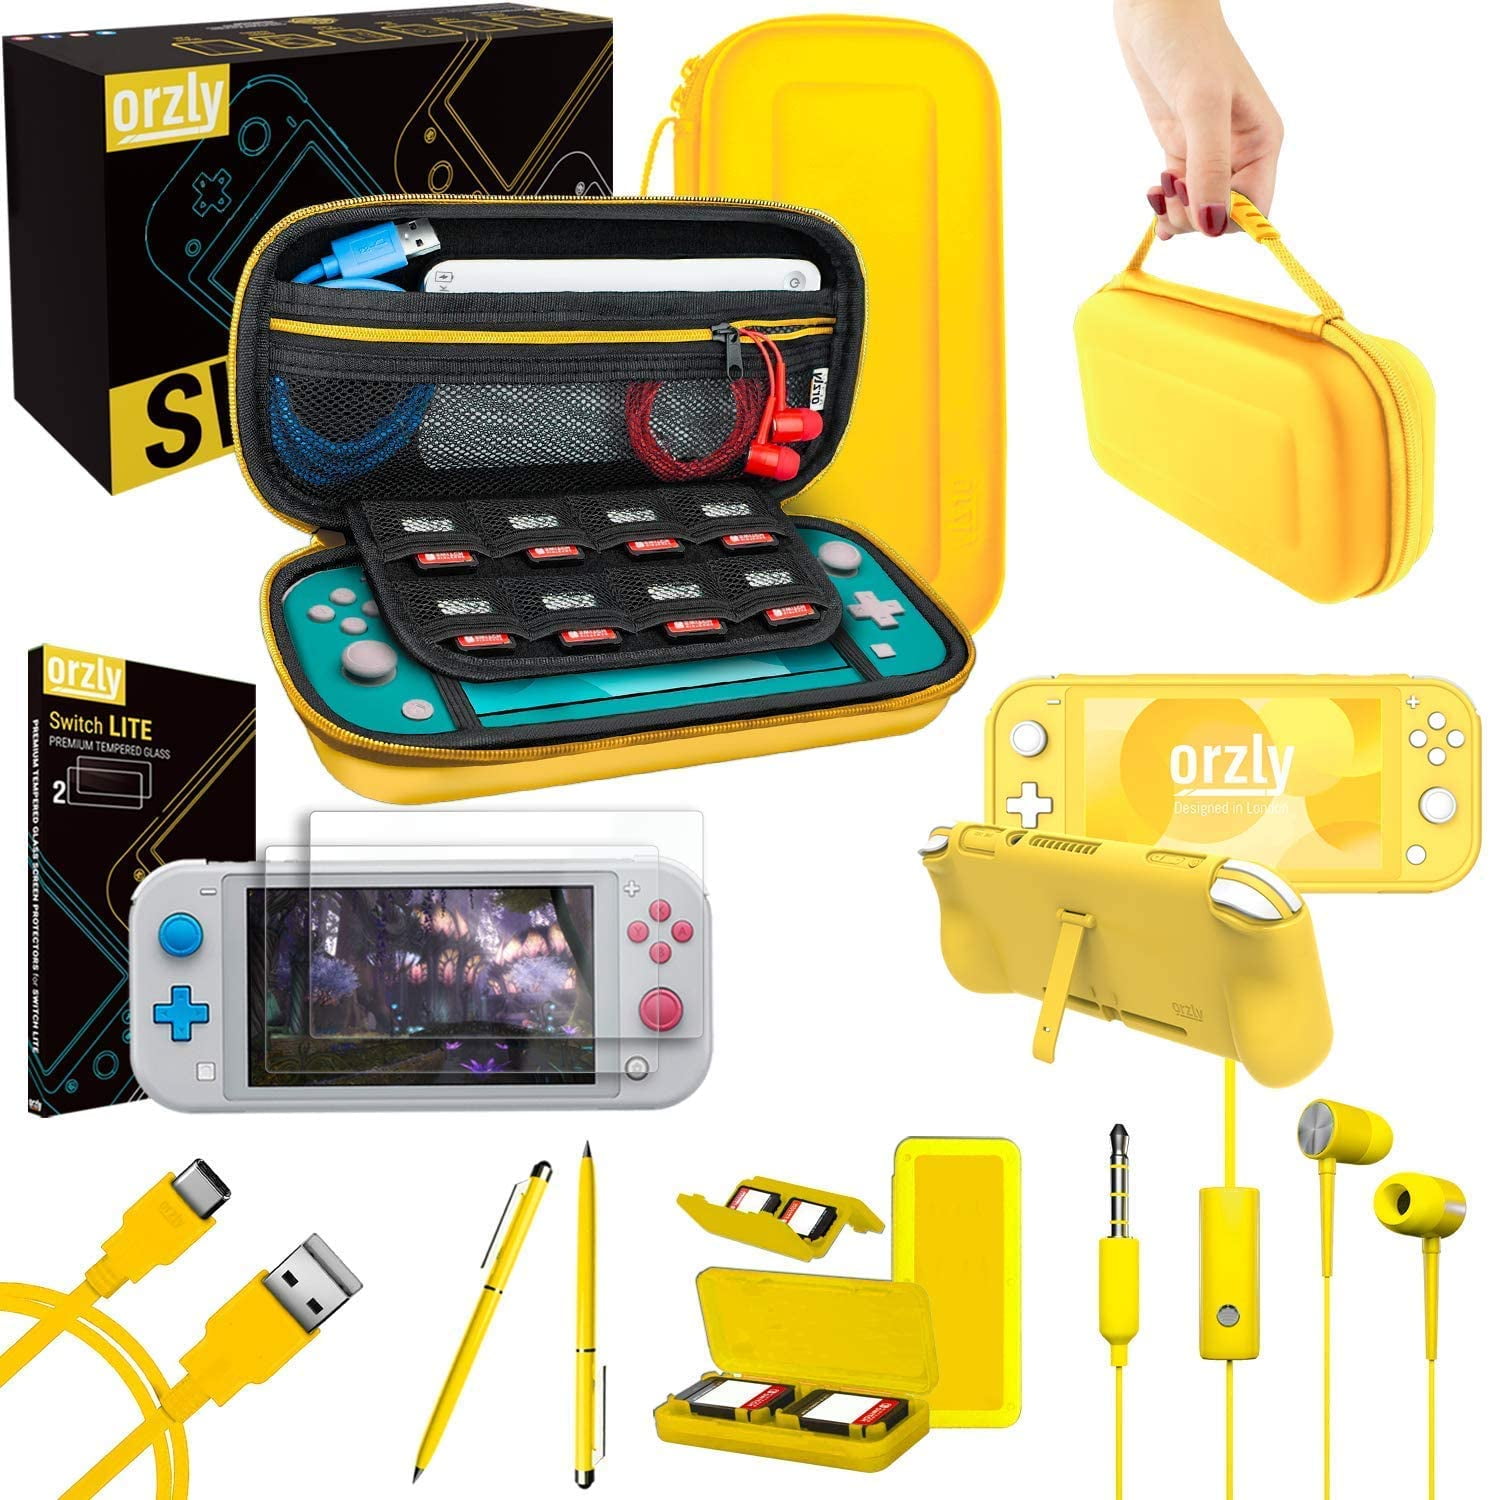 Orzly Switch Lite Accessories Bundle - Case & Screen Protector for Nintendo Switch Lite Console, USB Cable, Games Holder, Comfort Grip Case, Headphones, Thumb-Grip Pack & more (Orzly Gift Pack Yellow)